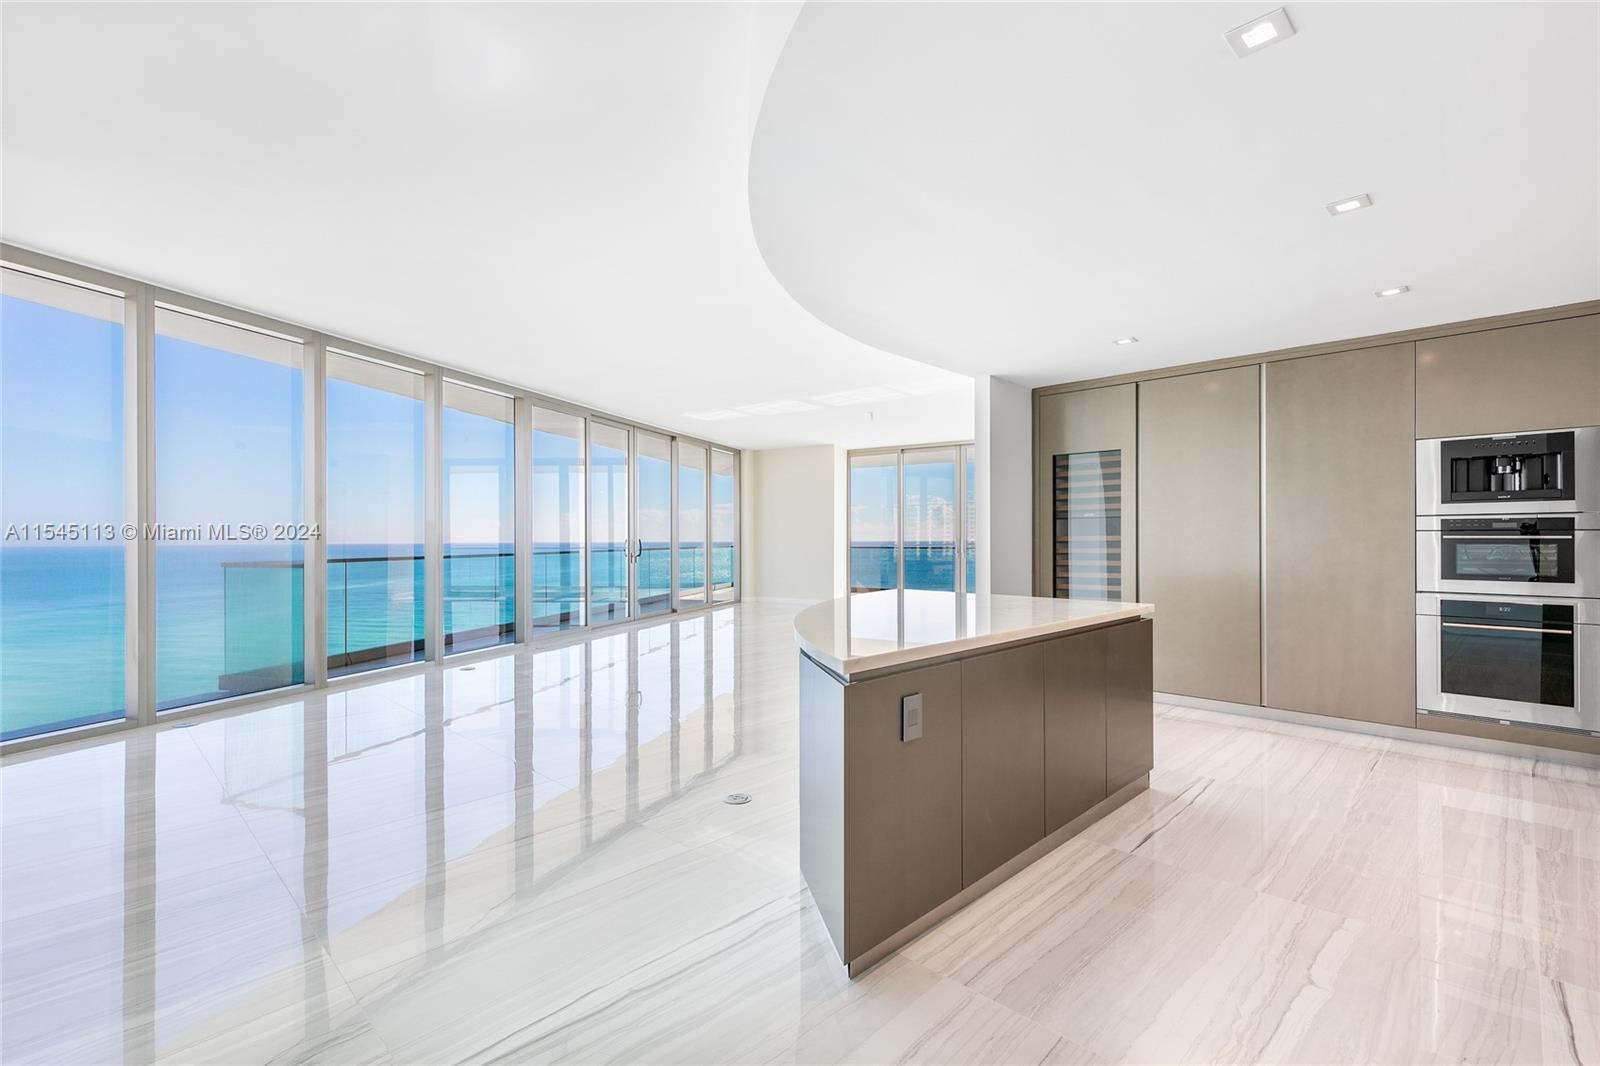 Photo of 18975 Collins Ave #700 in Sunny Isles Beach, FL